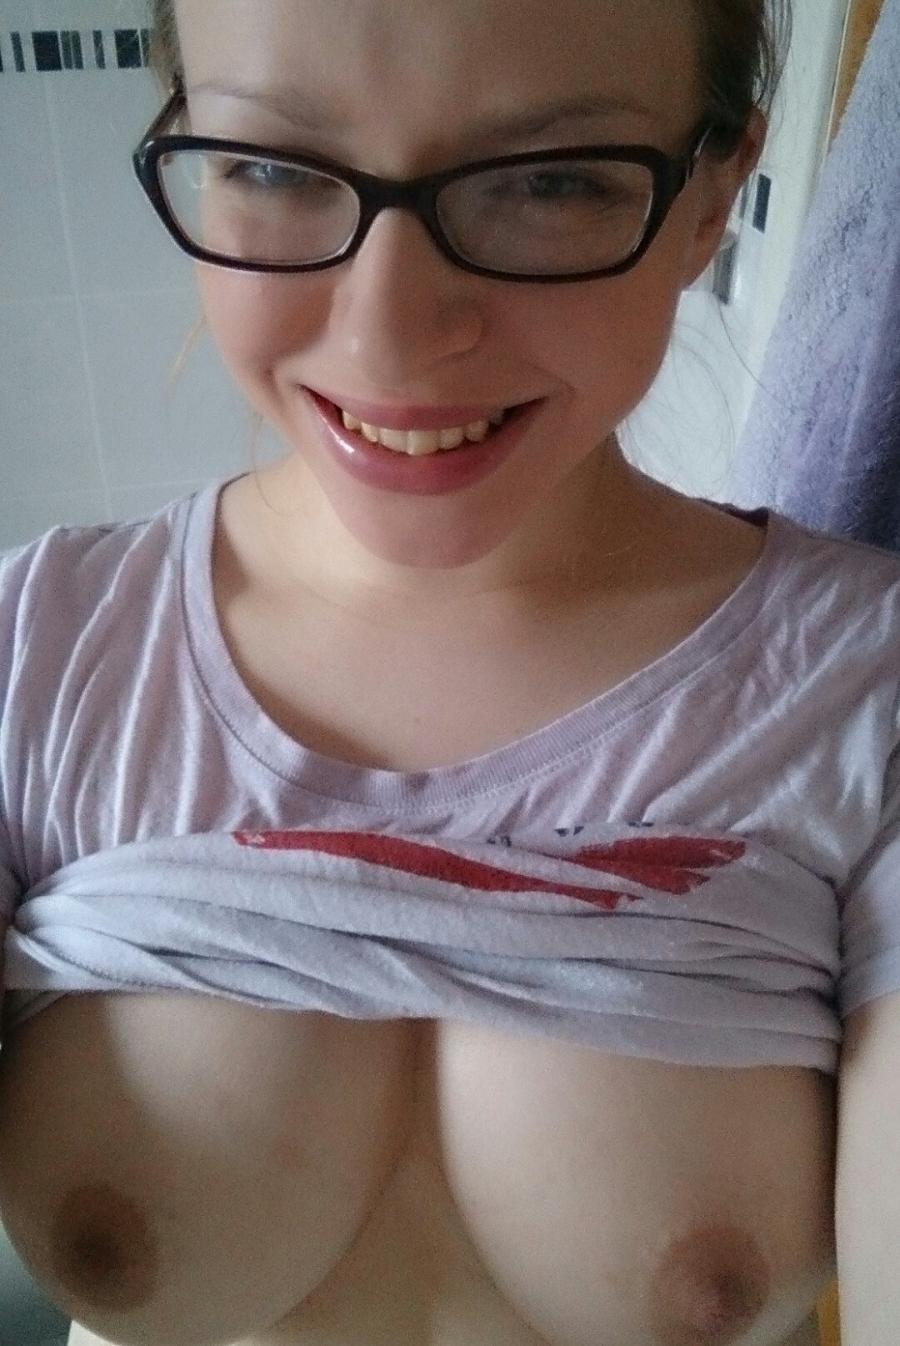 Amateur Woman with Glasses on and her Boobs Out